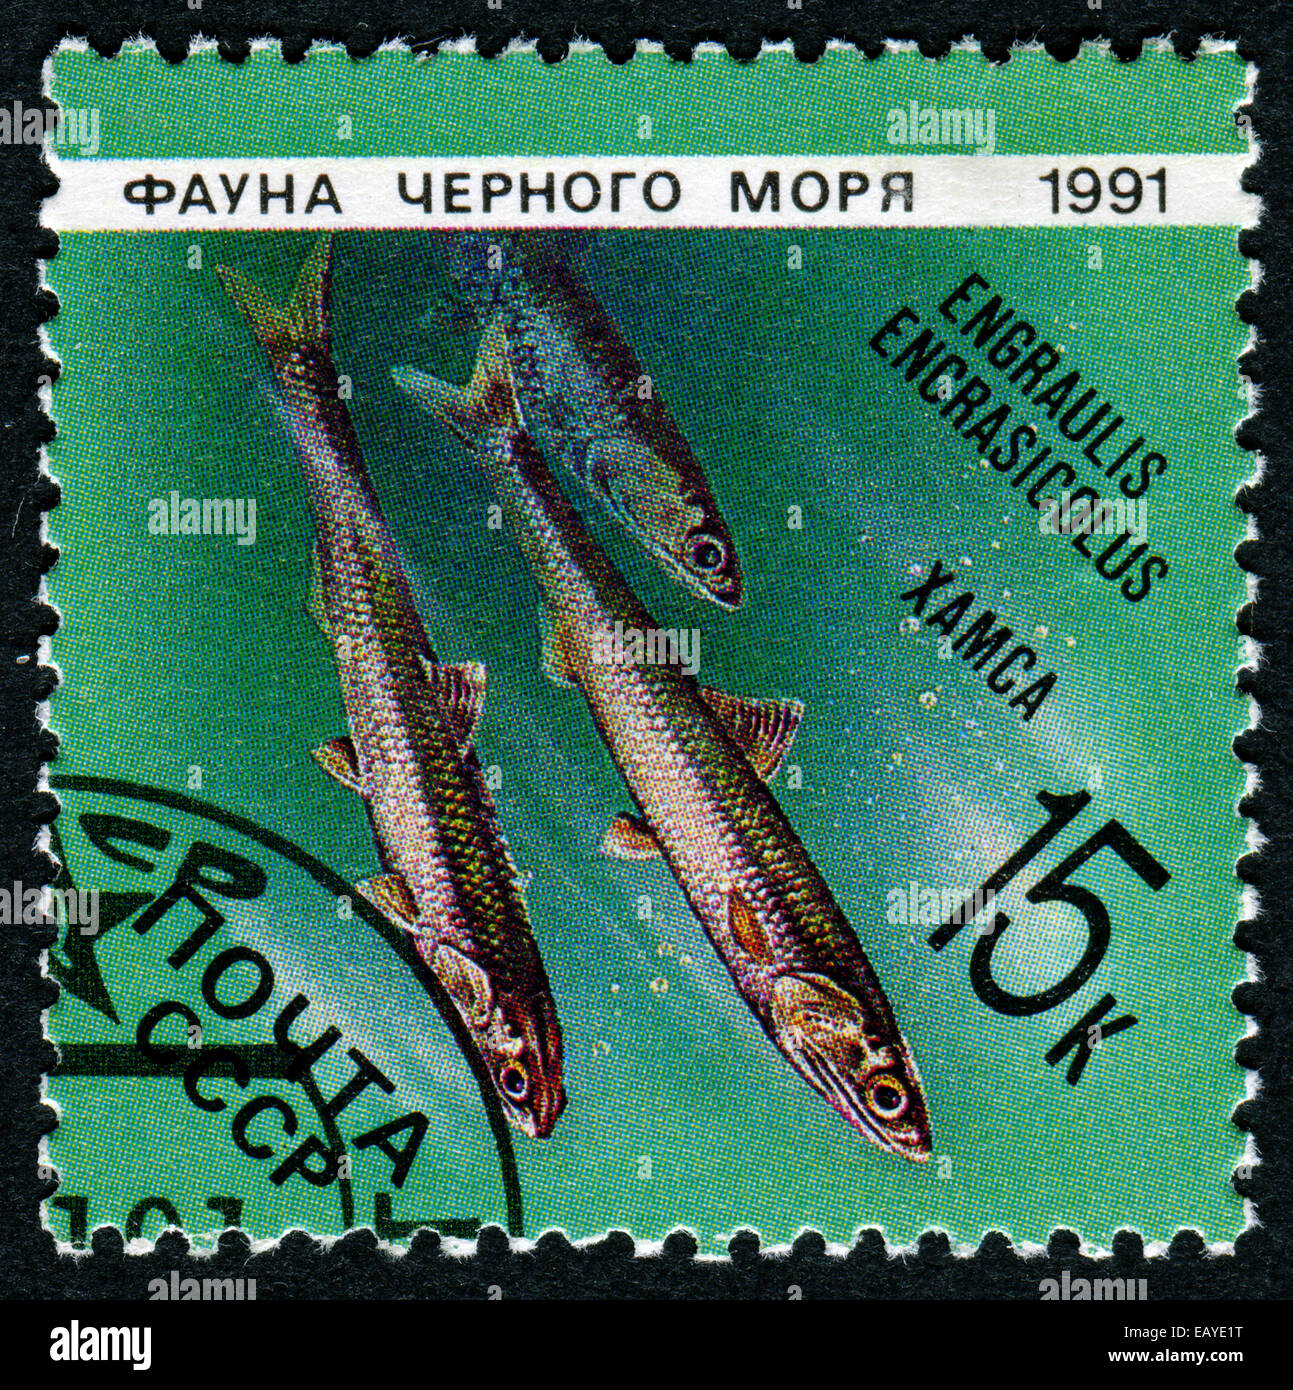 USSR - CIRCA 1991: A Stamp printed in the USSR shows an image of the European anchovy, Engraulis encrasicolus, circa 1991. Stock Photo